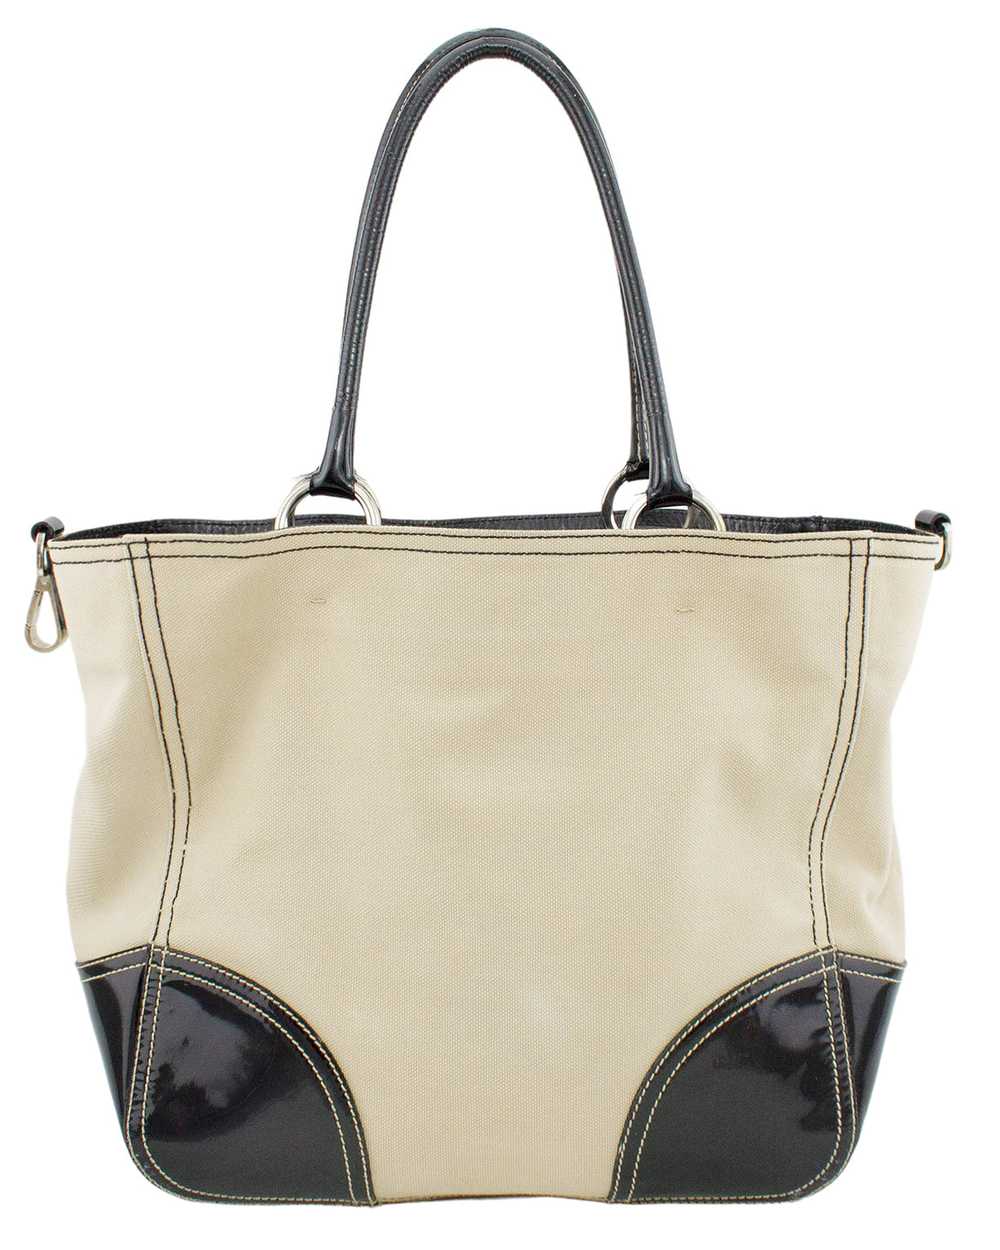 Prada Beige Canvas Tote with Black Patent Leather - image 3